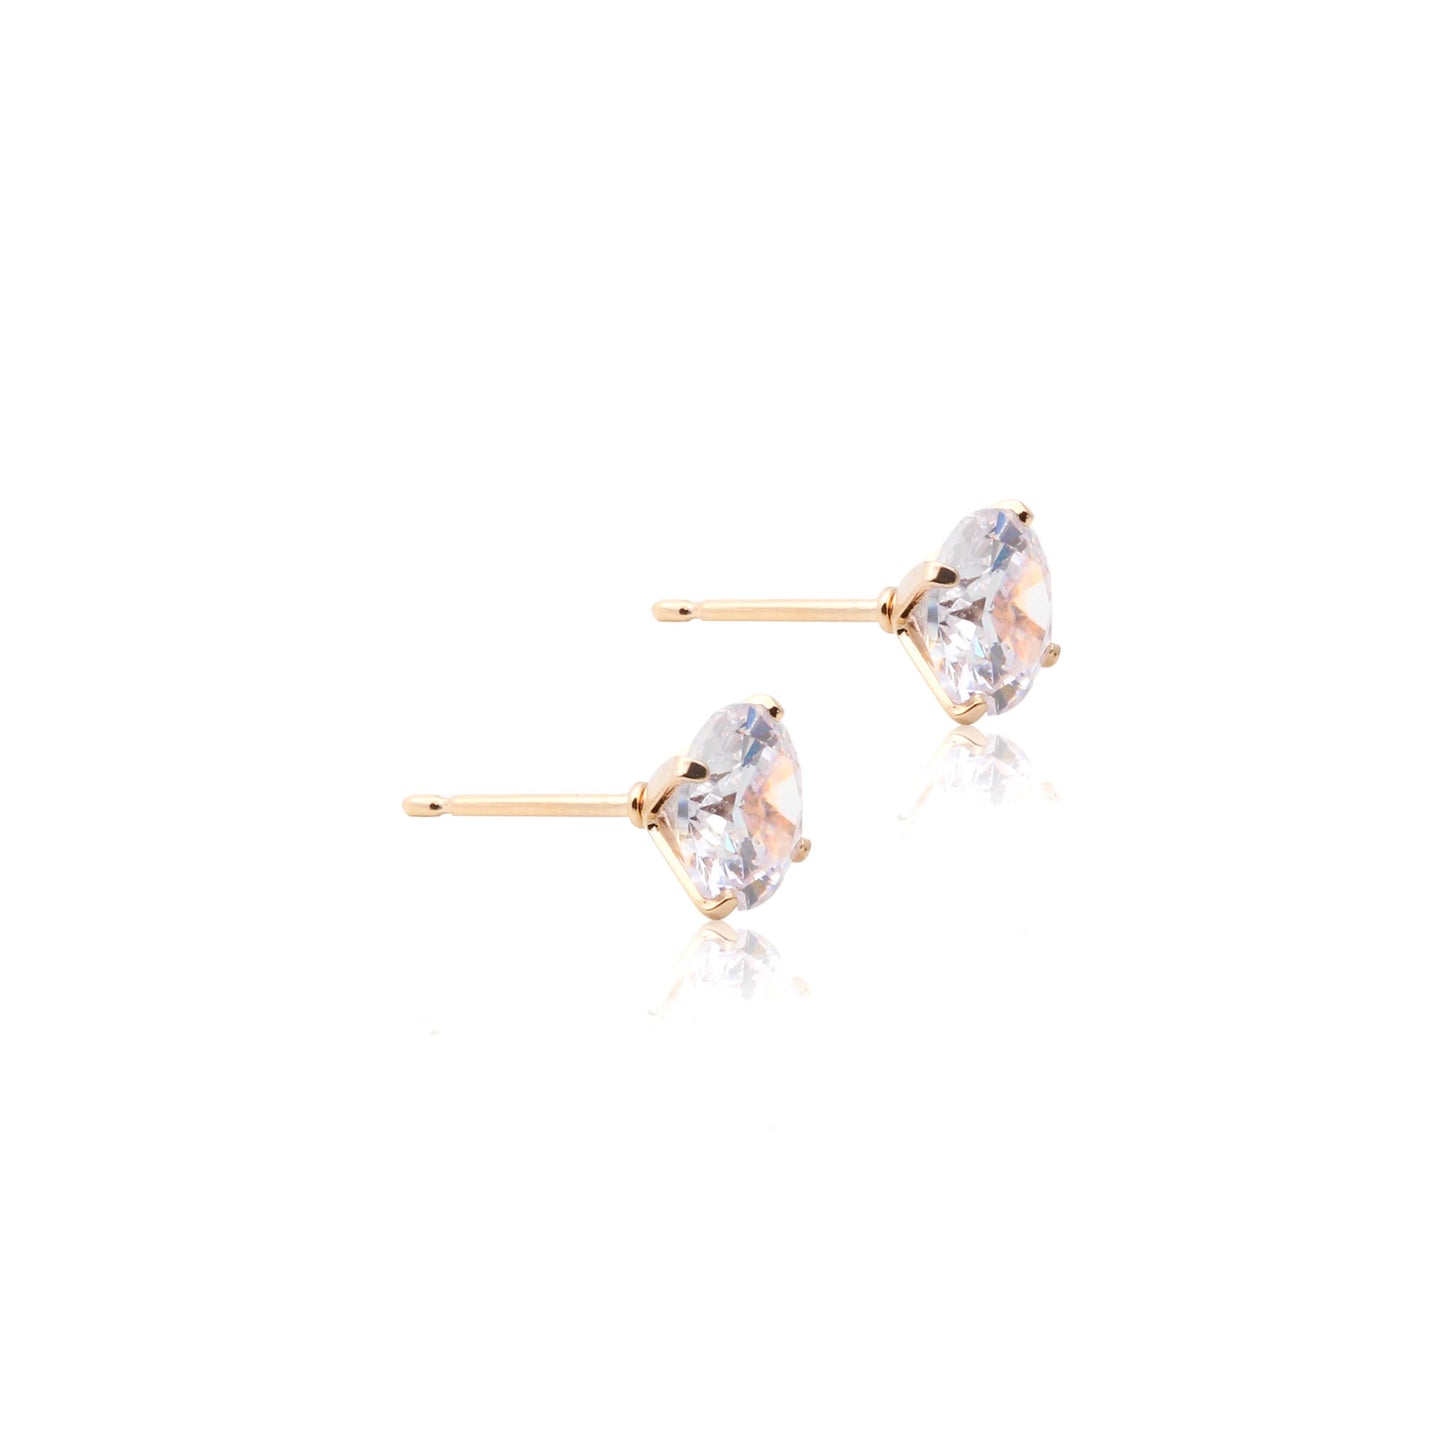 Solitaire earrings in 18k gold plating 3MM, 5MM, 7MM